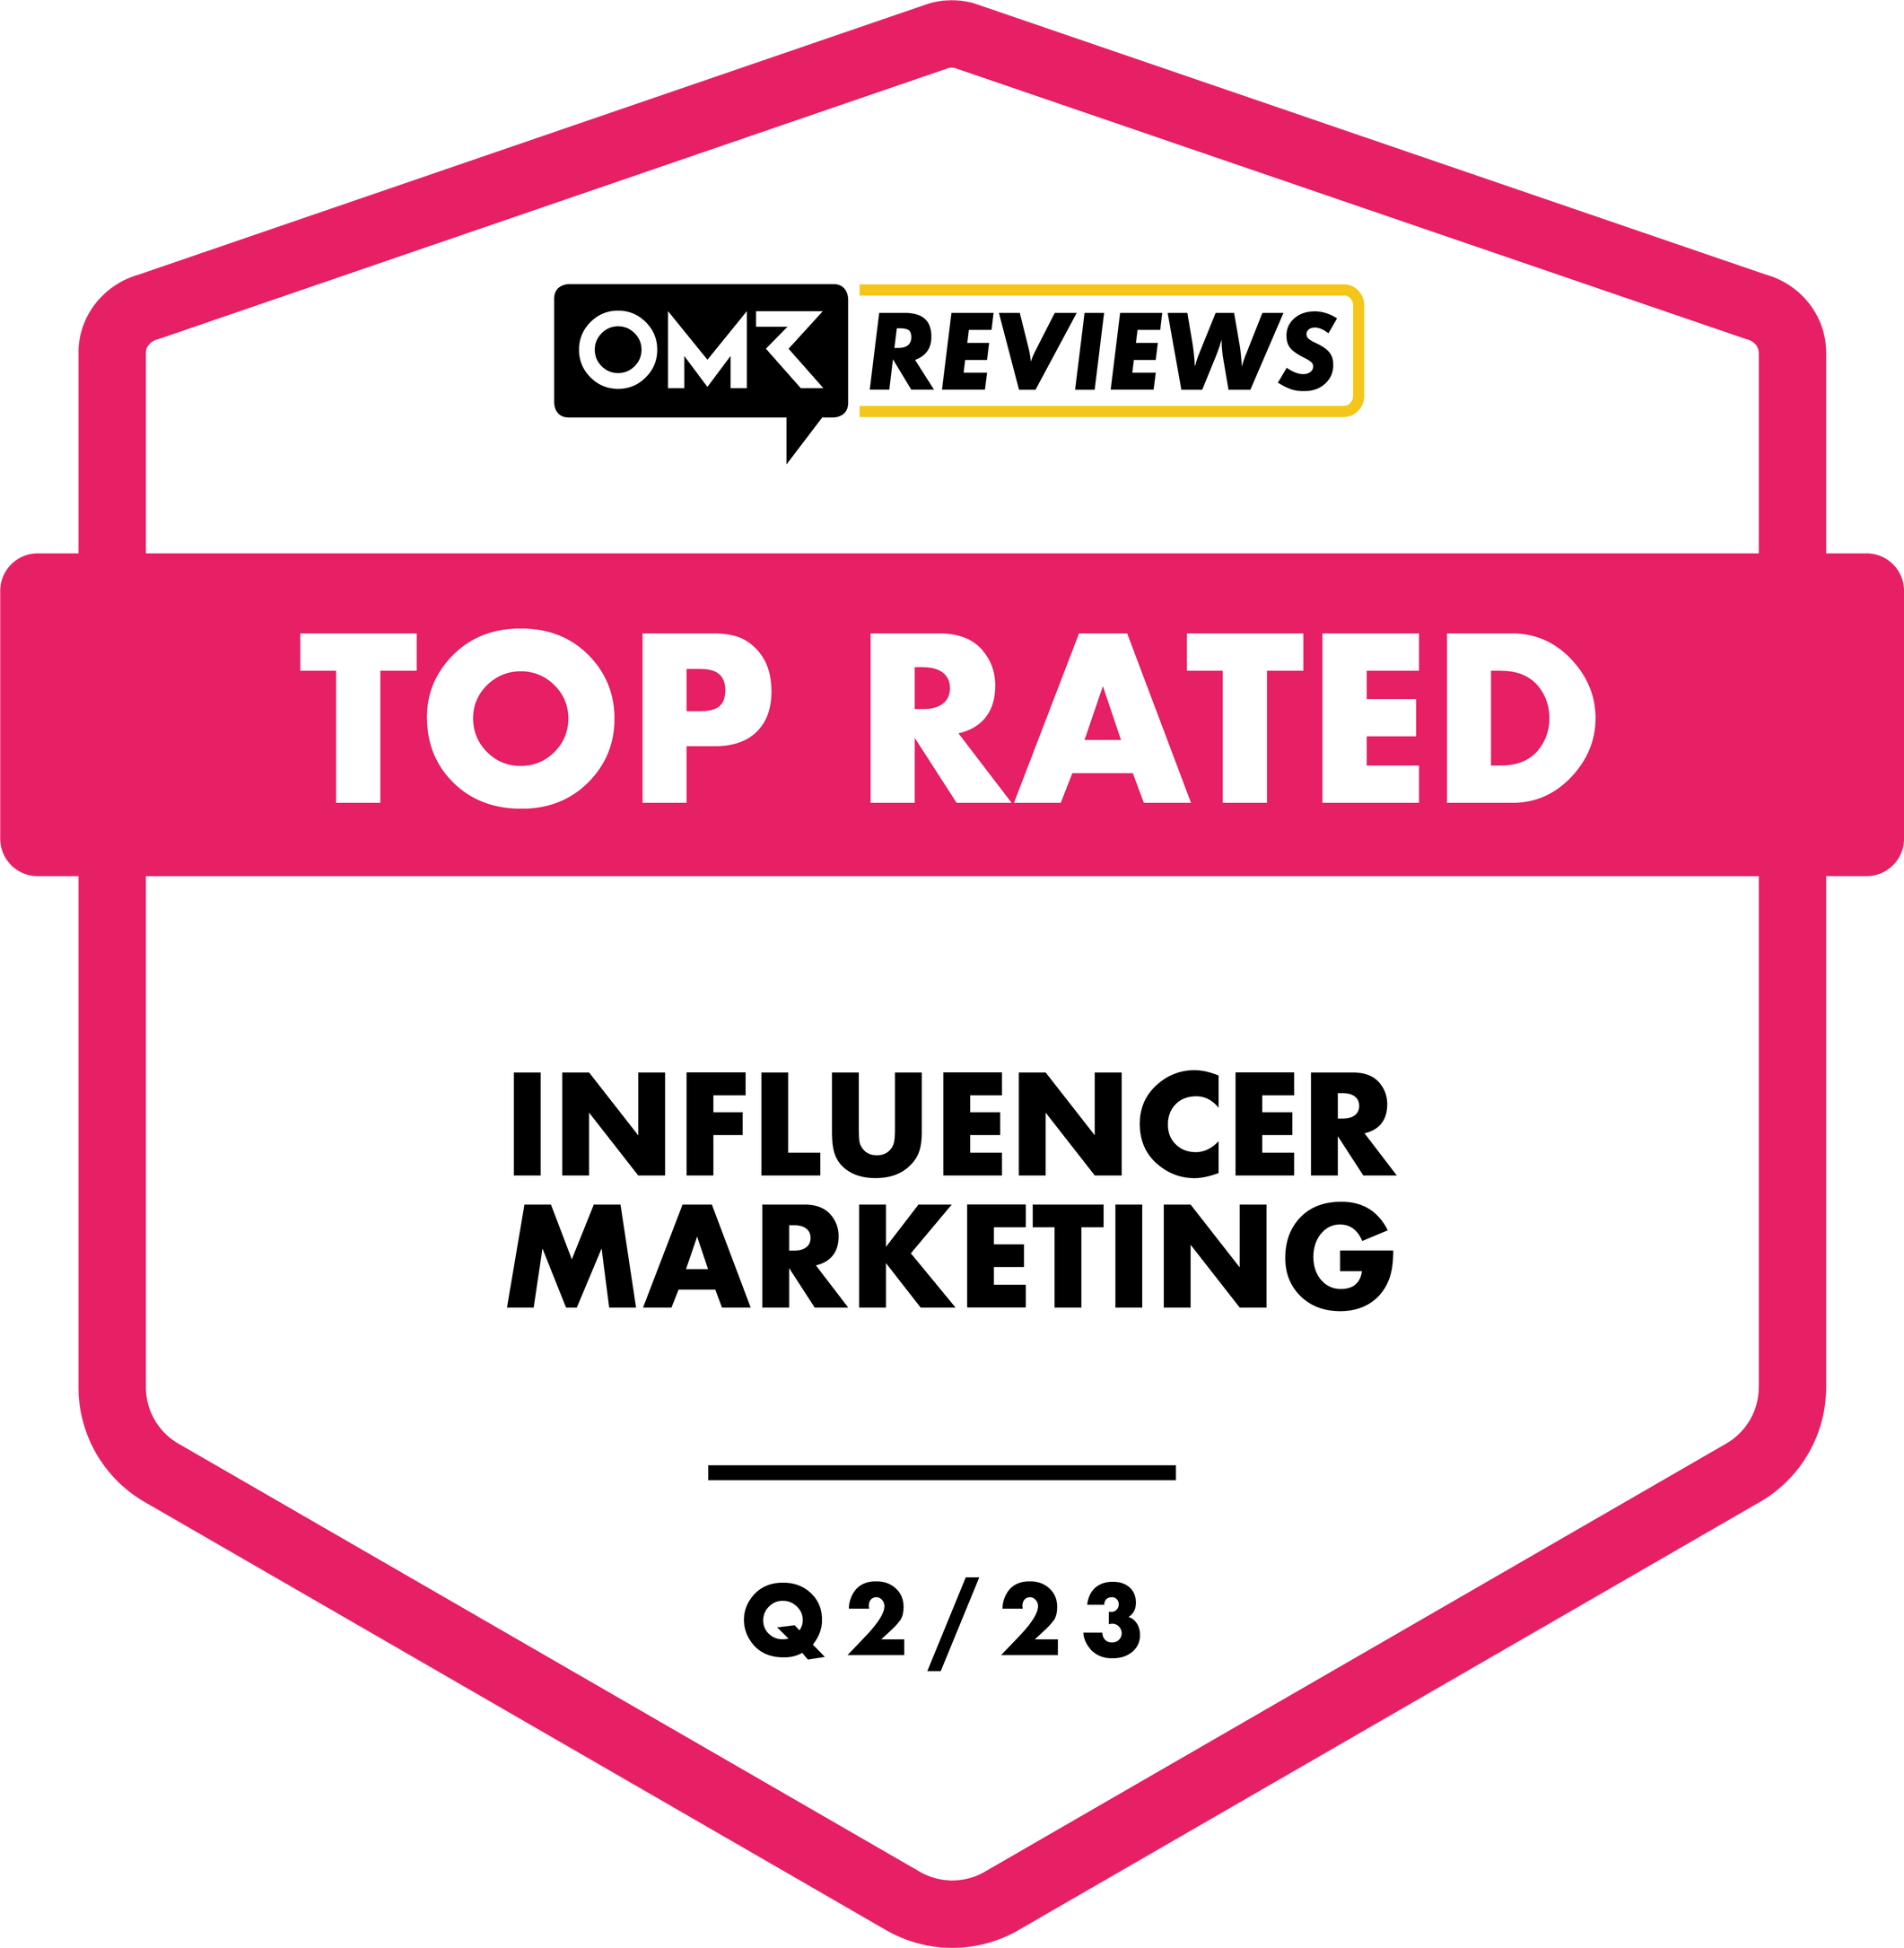 Top Rated Influencer Marketing Tool Badge by OMR Q2 2023